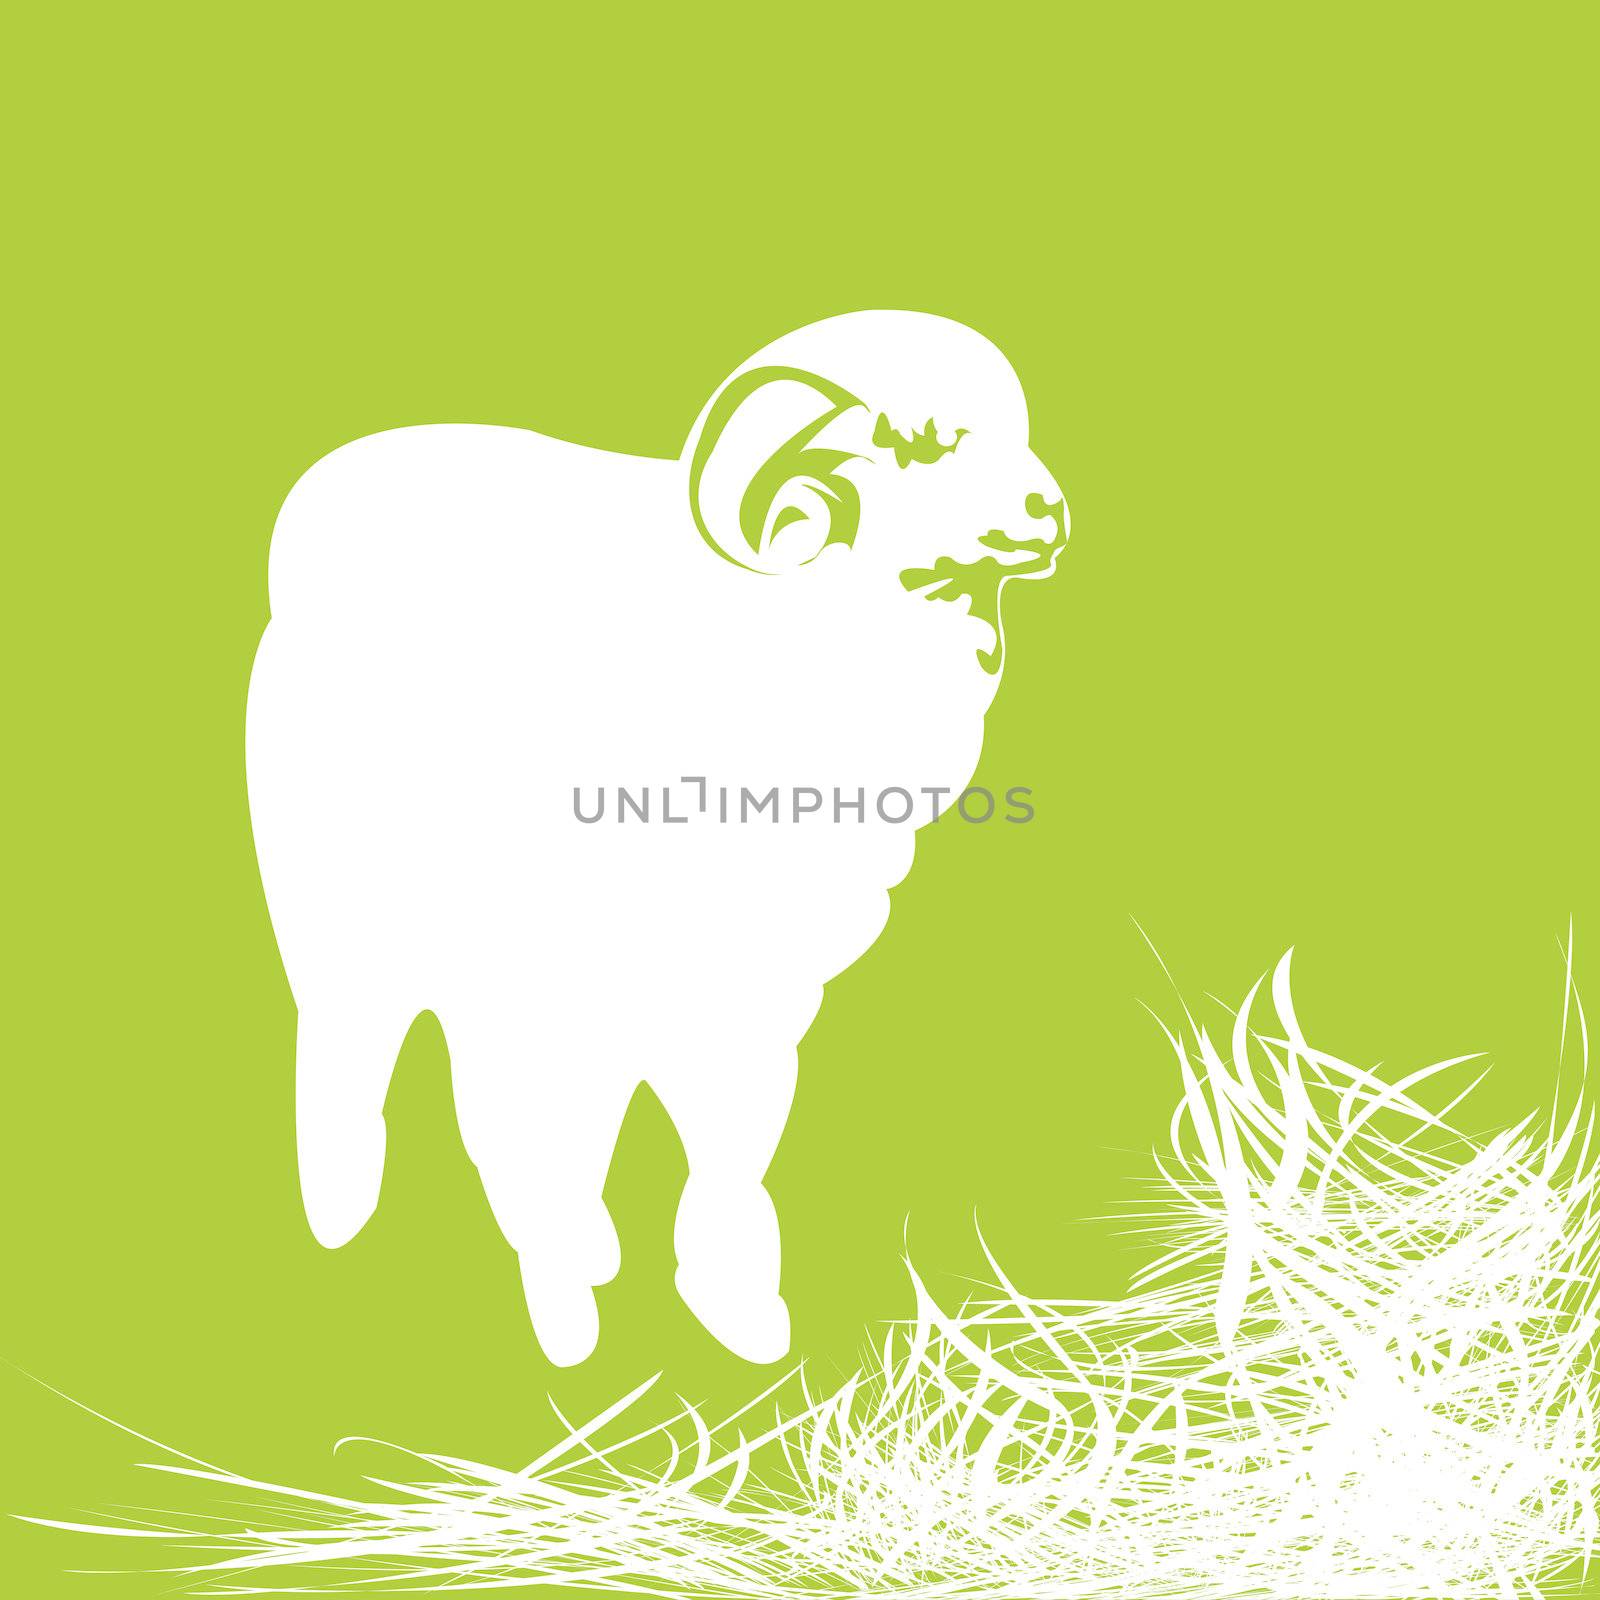 Sheep silhouette and grass- isolated objects over white background